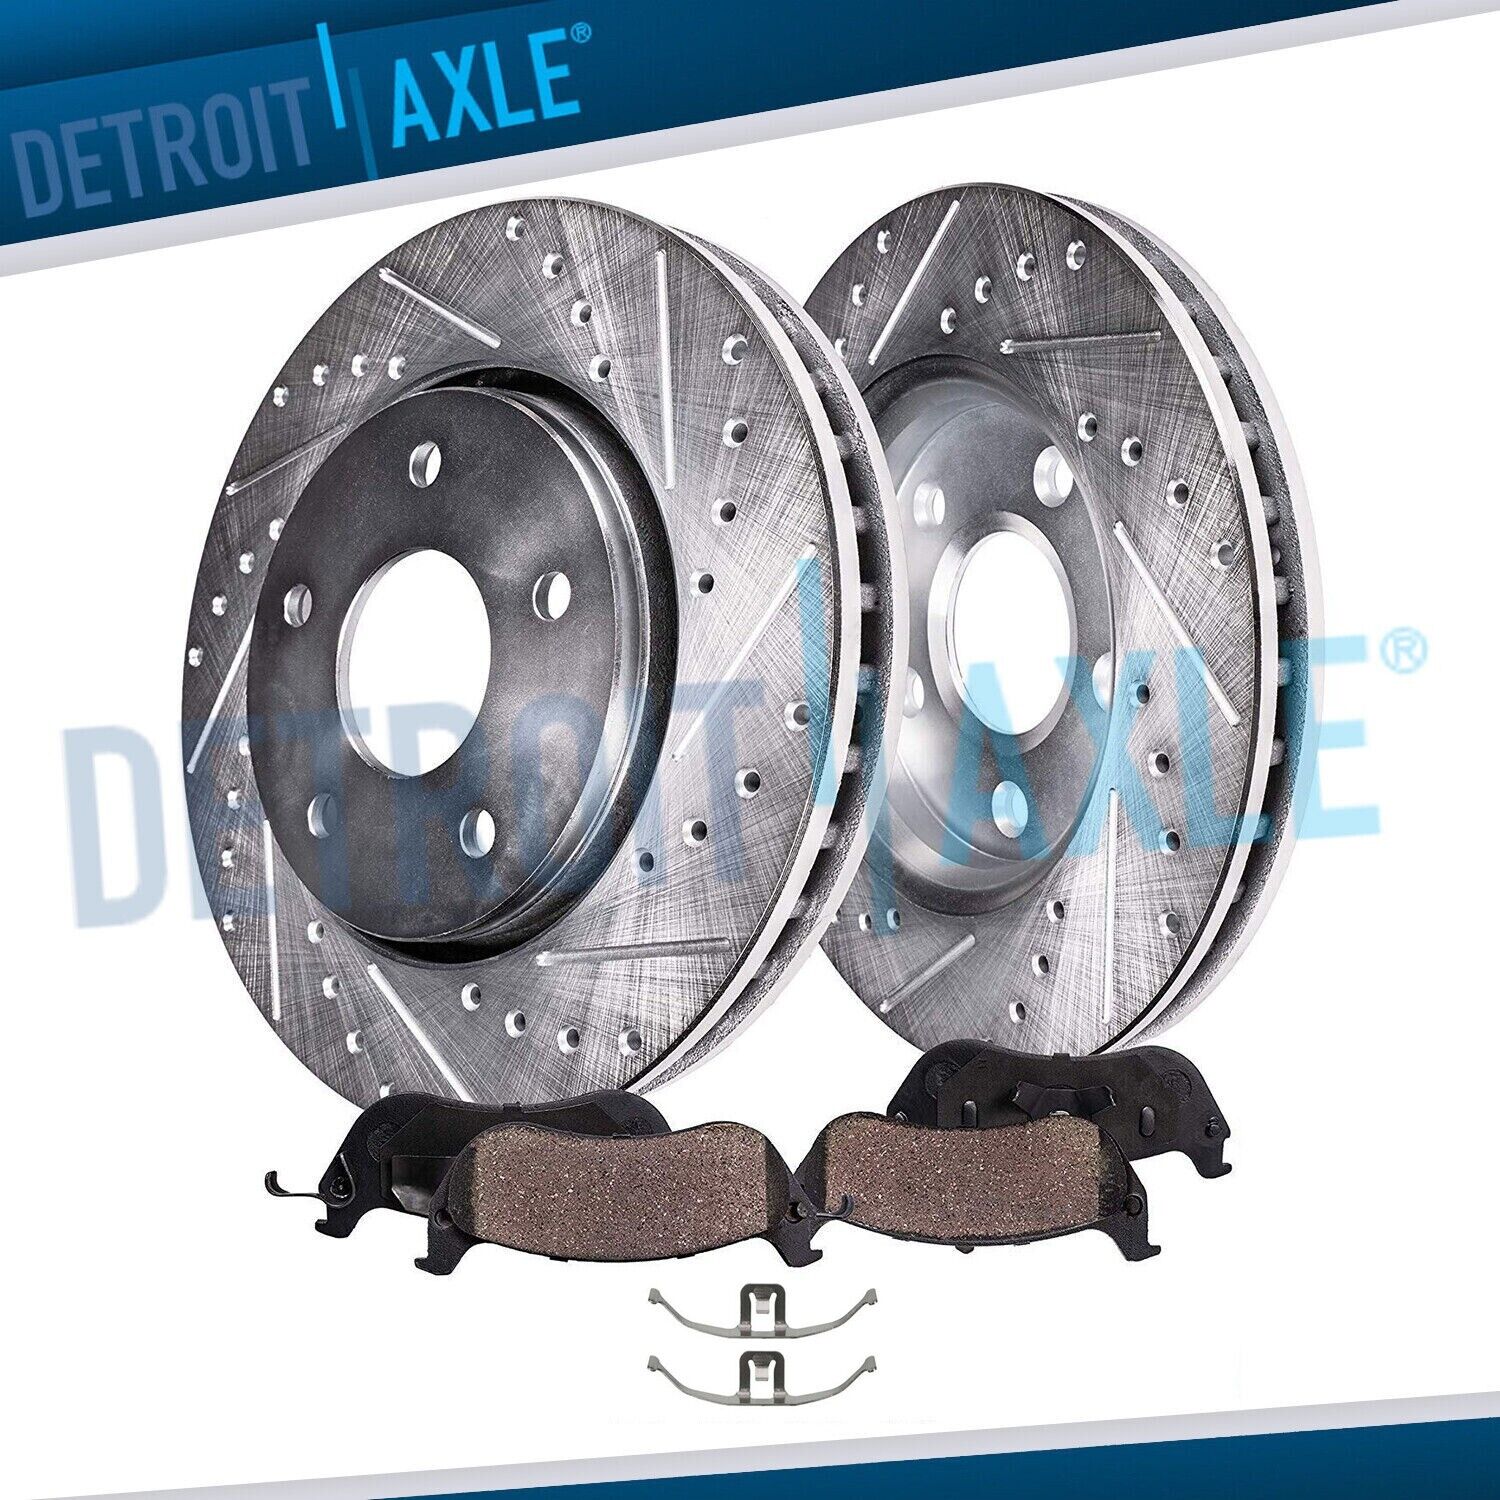 320mm Front Drilled Rotors Brake Pads for Audi A4 A7 Quattro A5 A6 AllRoad Q5